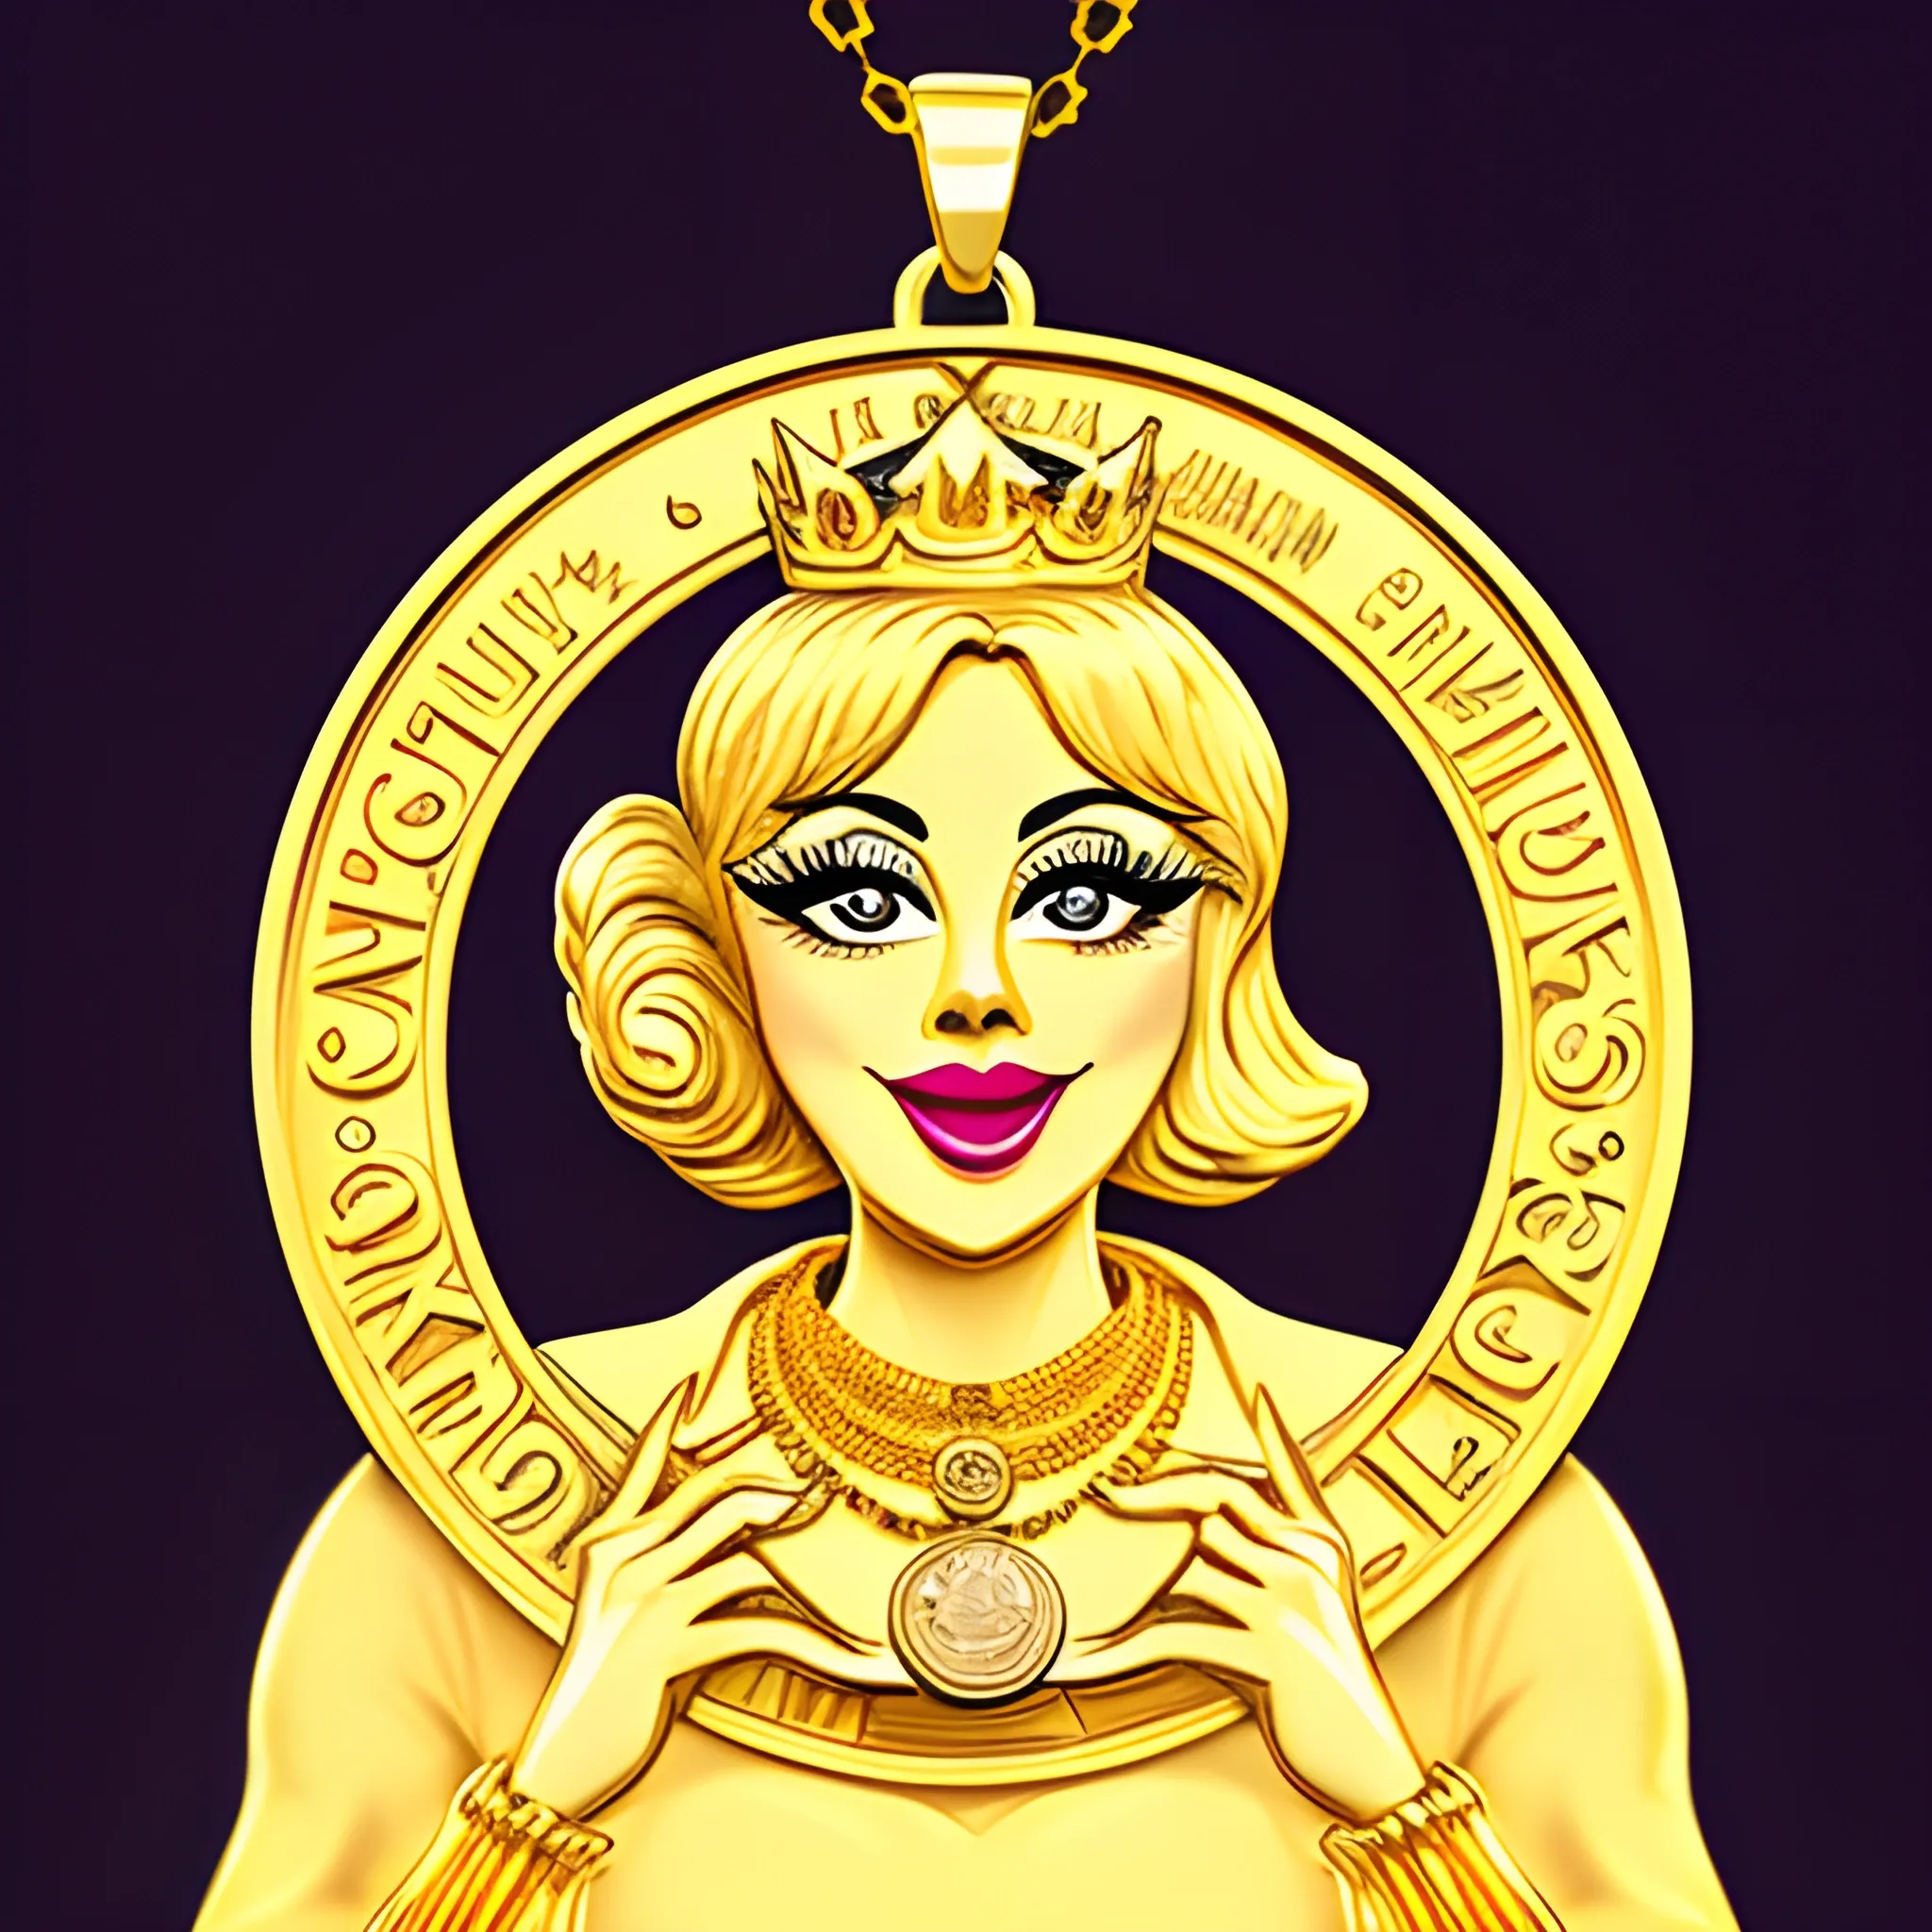 logo, white duck, gold coin in hand, crazy smile, gold crown, gold necklace, 2d illustration, vintage, disney style, big eyes, open mouth,